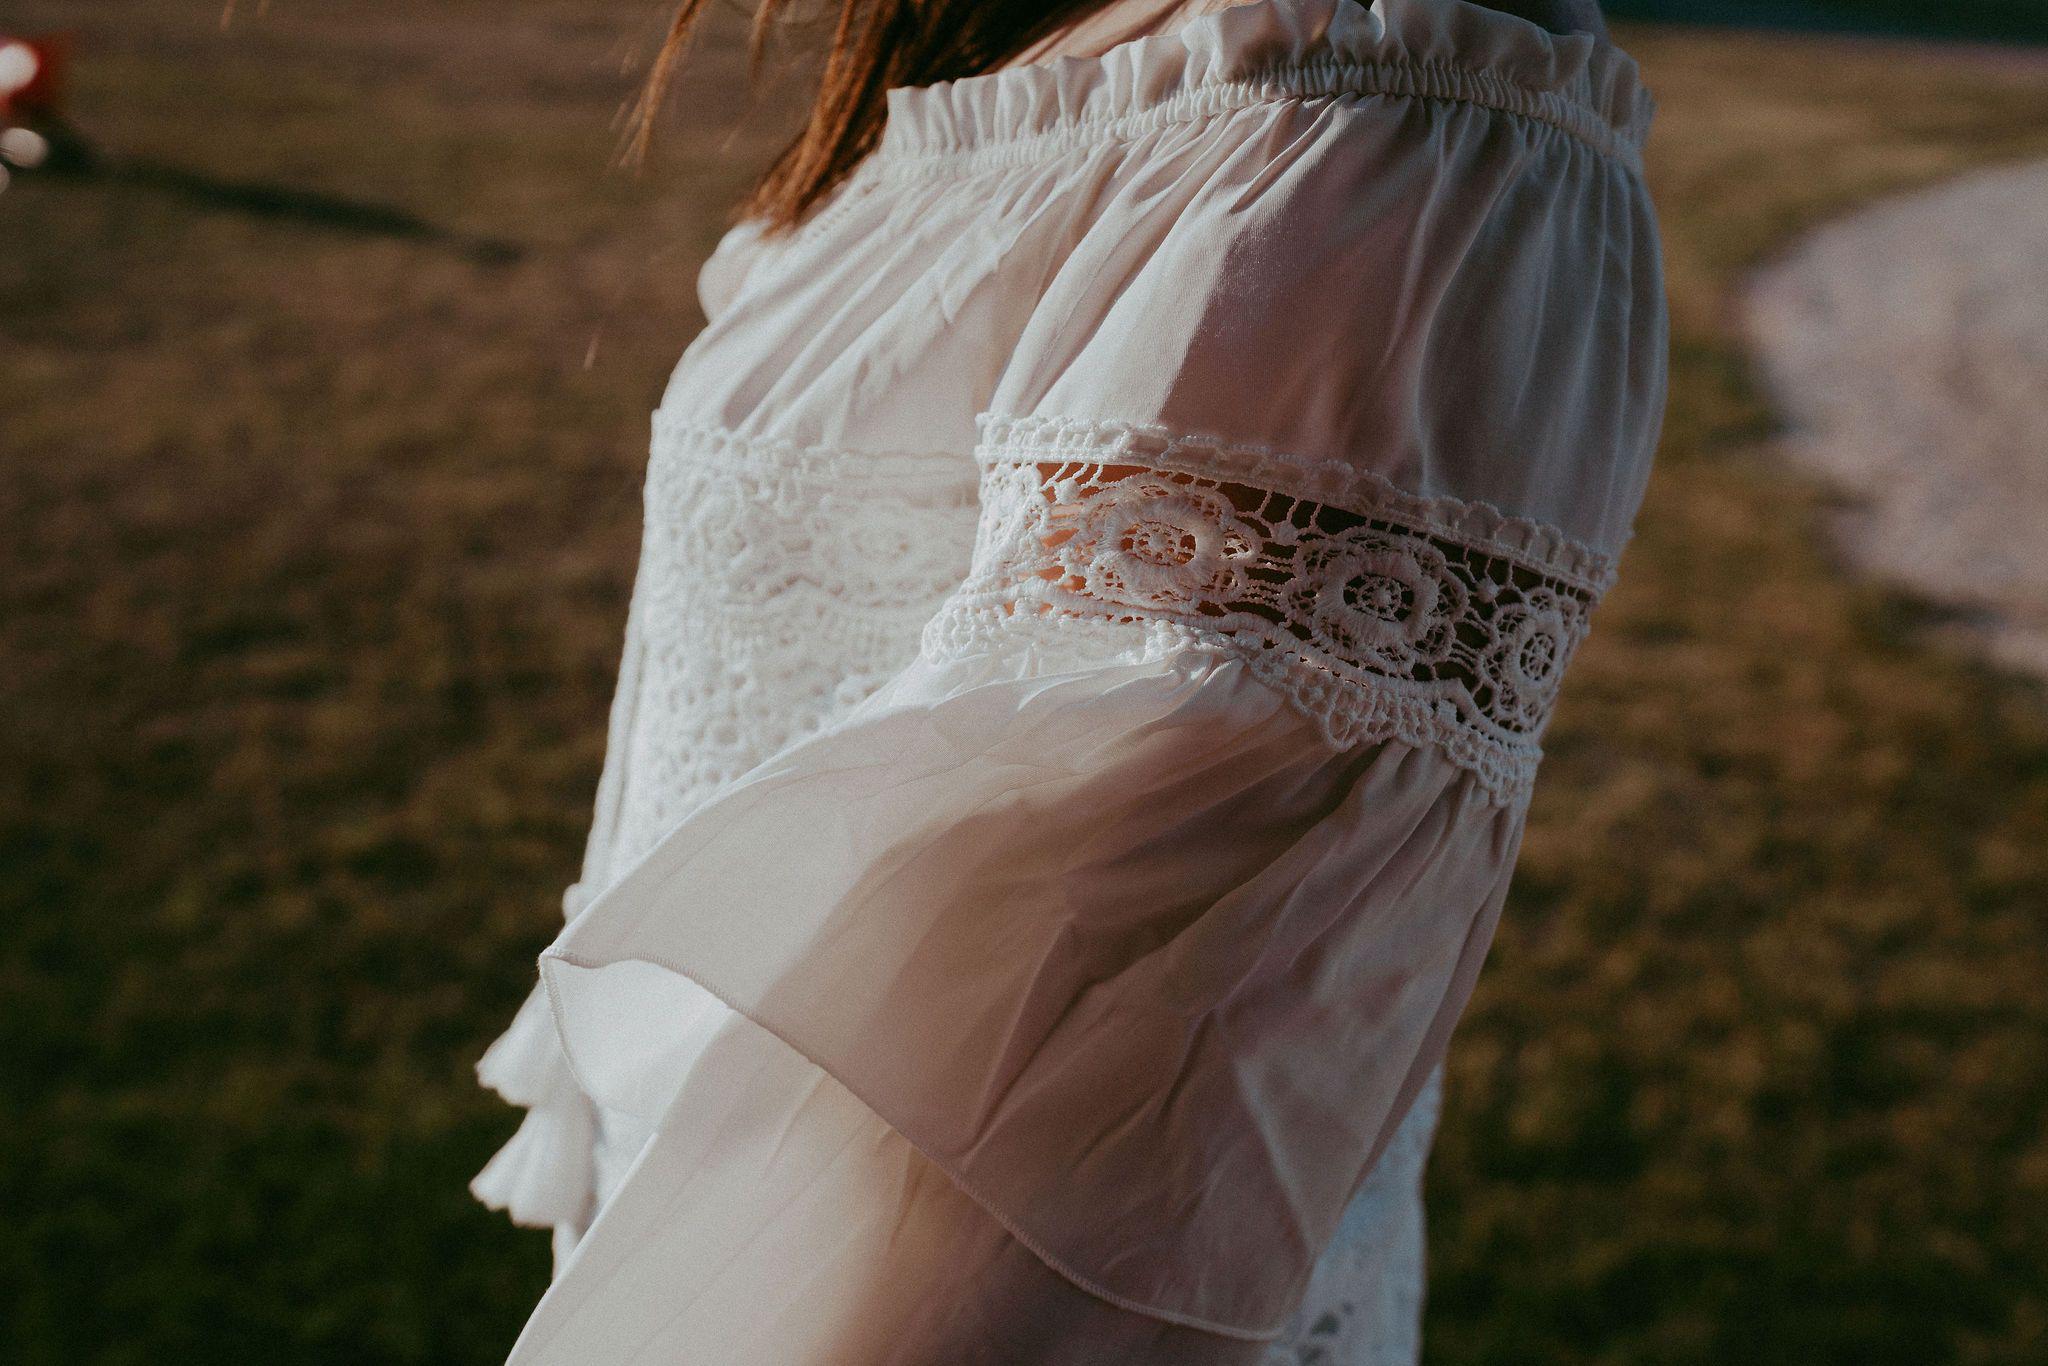 Tiered Off White Lace Blouse